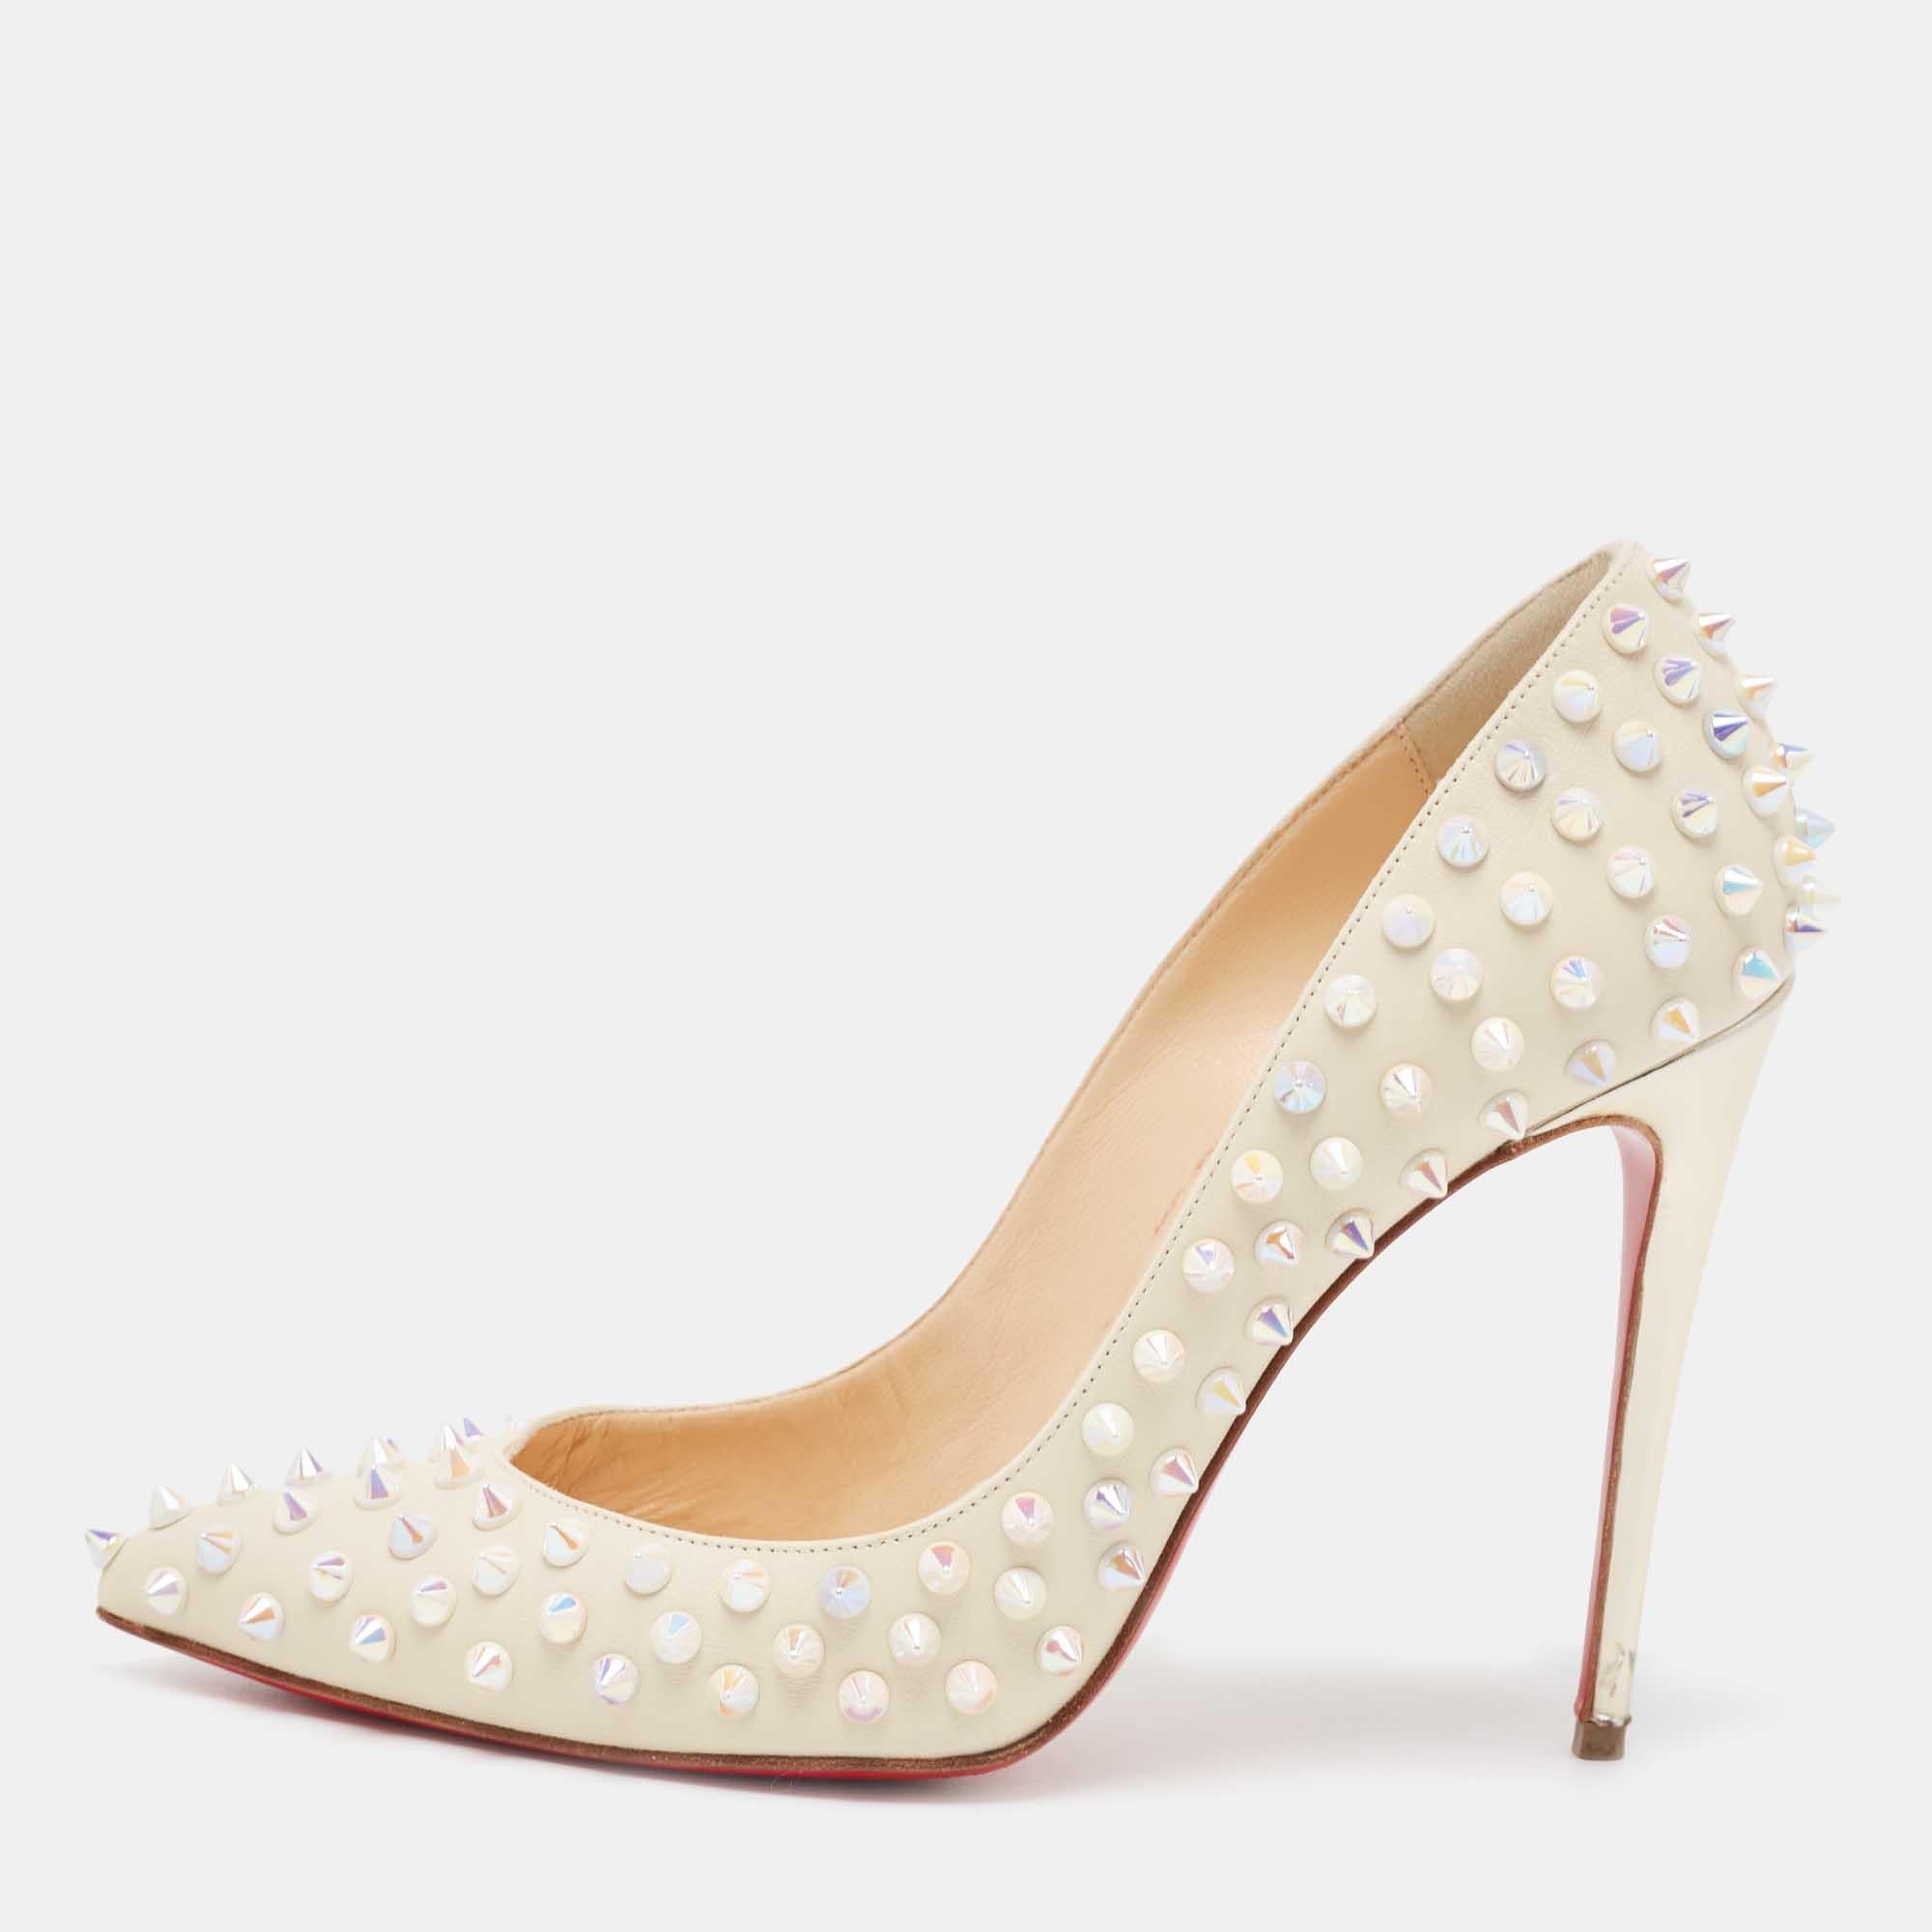 Christian Louboutin Cream Leather Follies Spikes Pointed Toe Pumps Size 38 For Sale 3